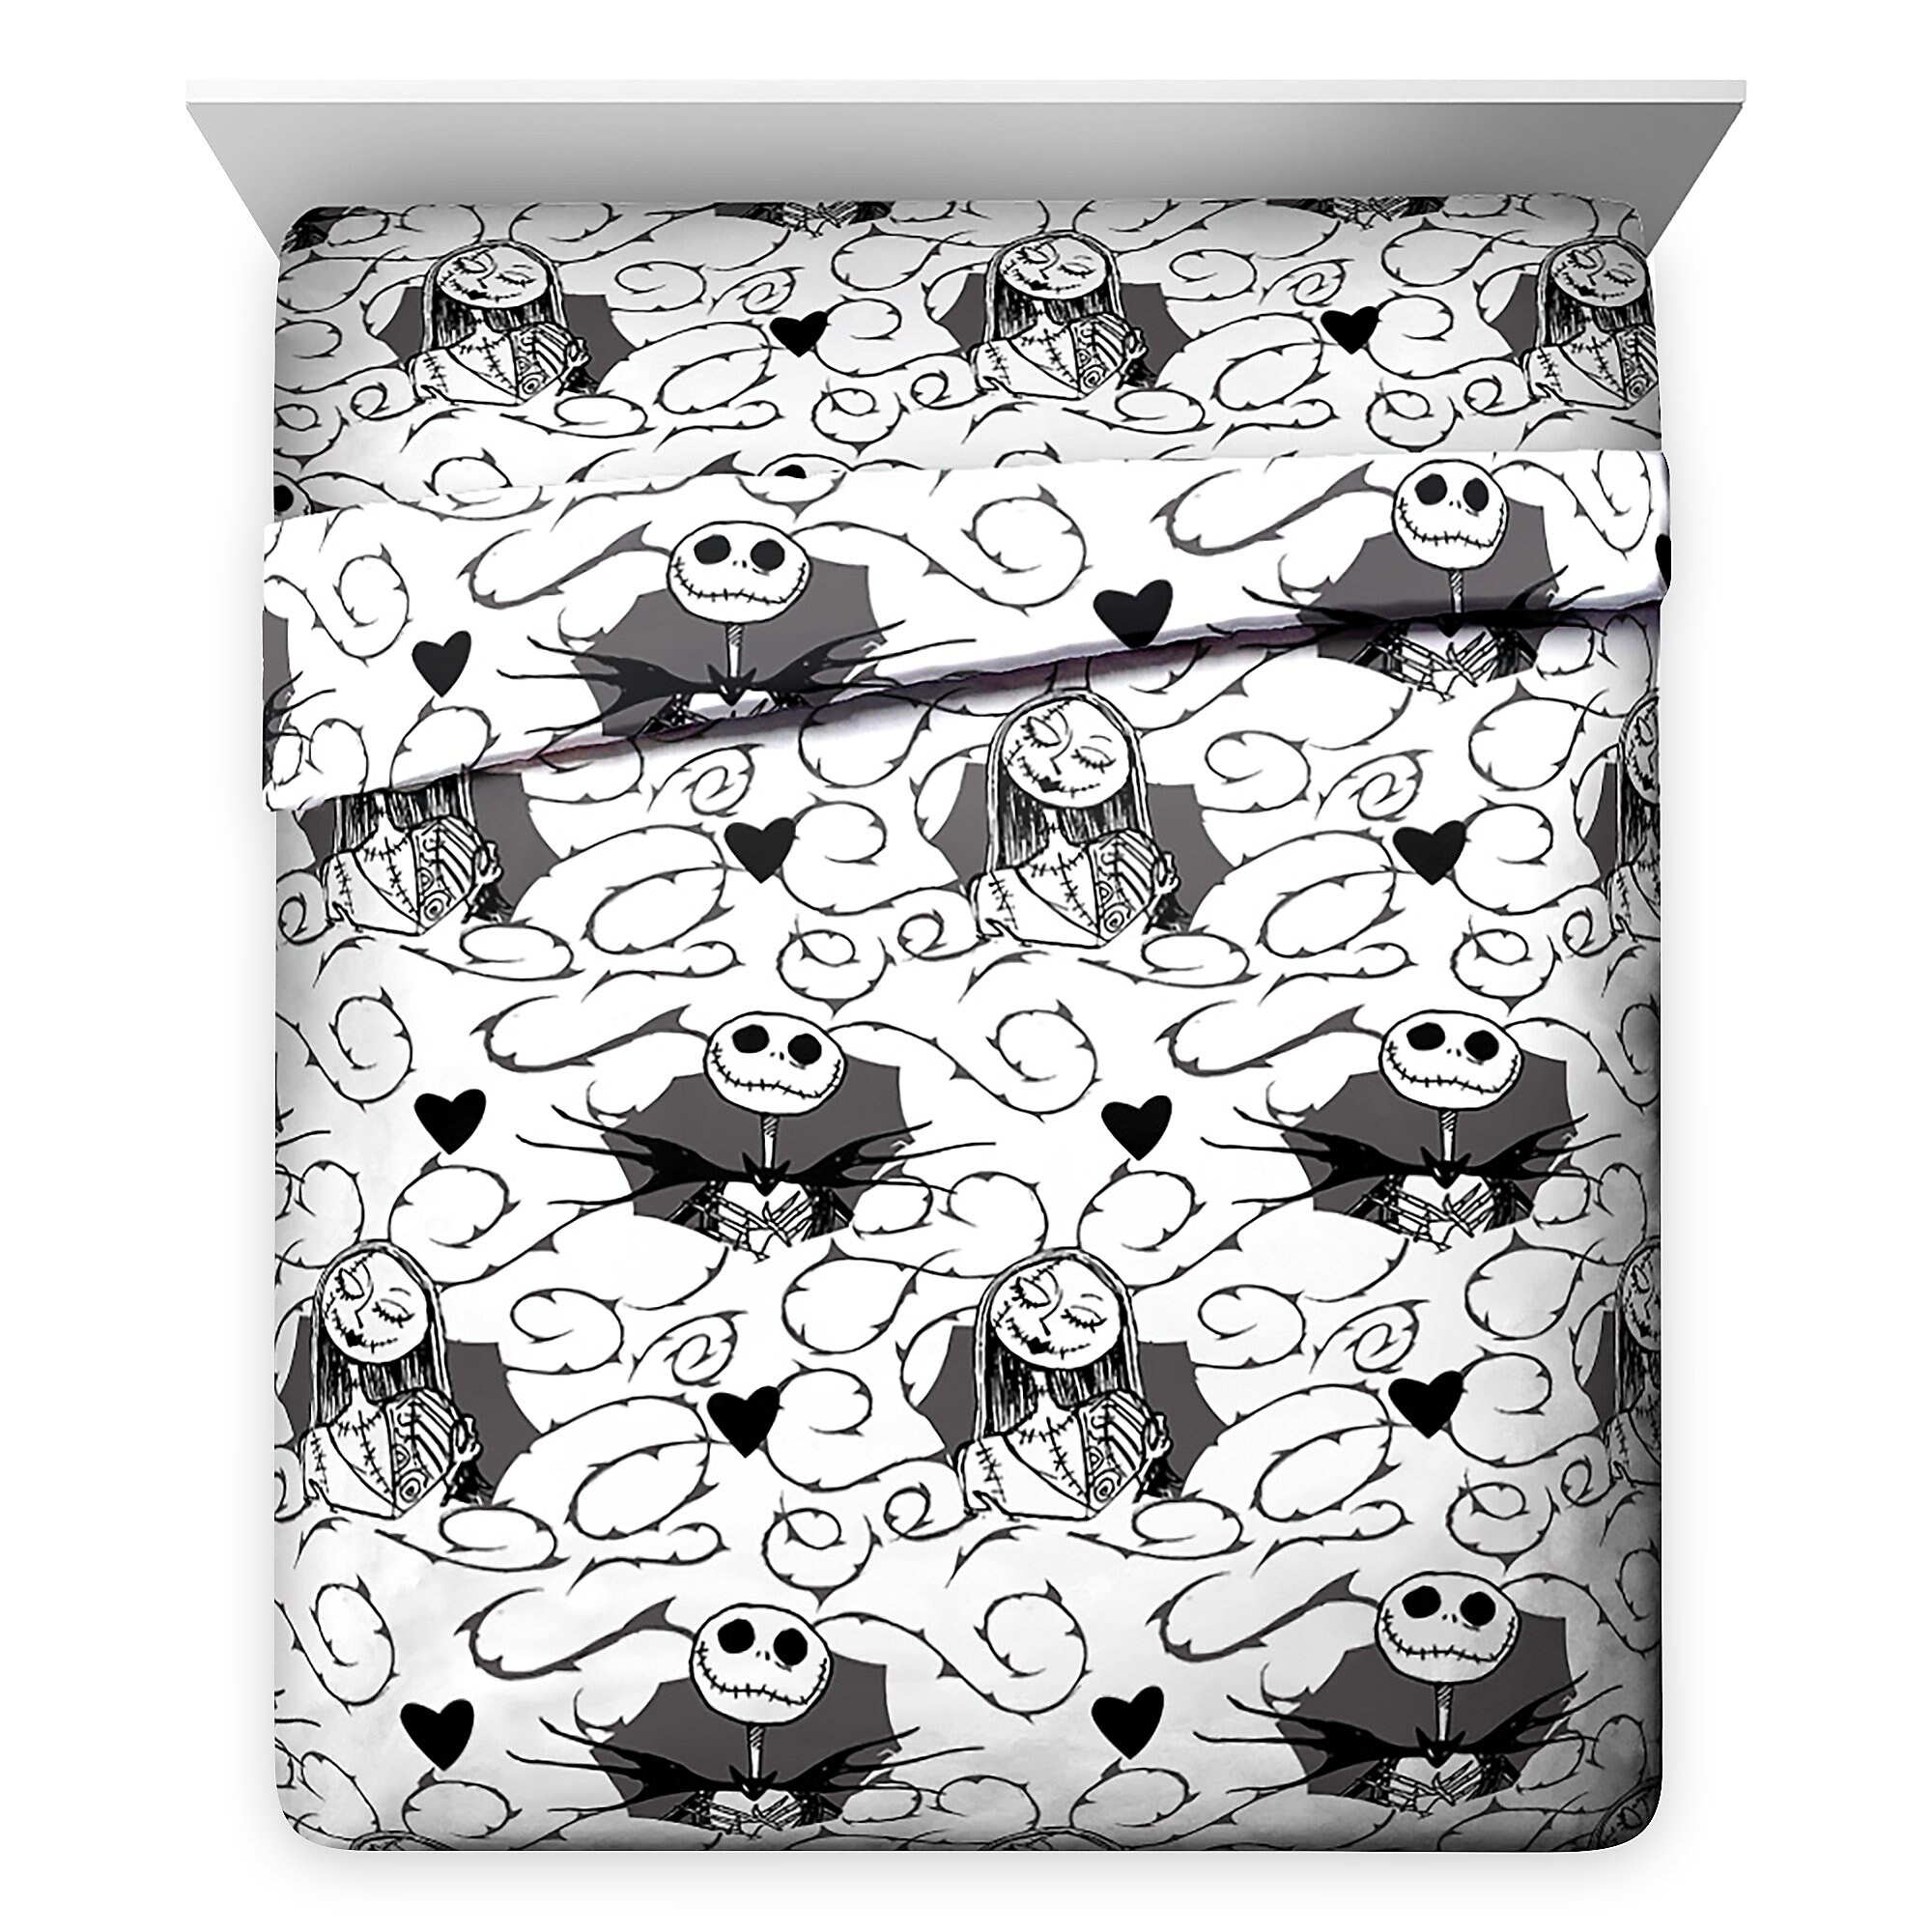 The Nightmare Before Christmas Sheet Set - Twin / Full / Queen